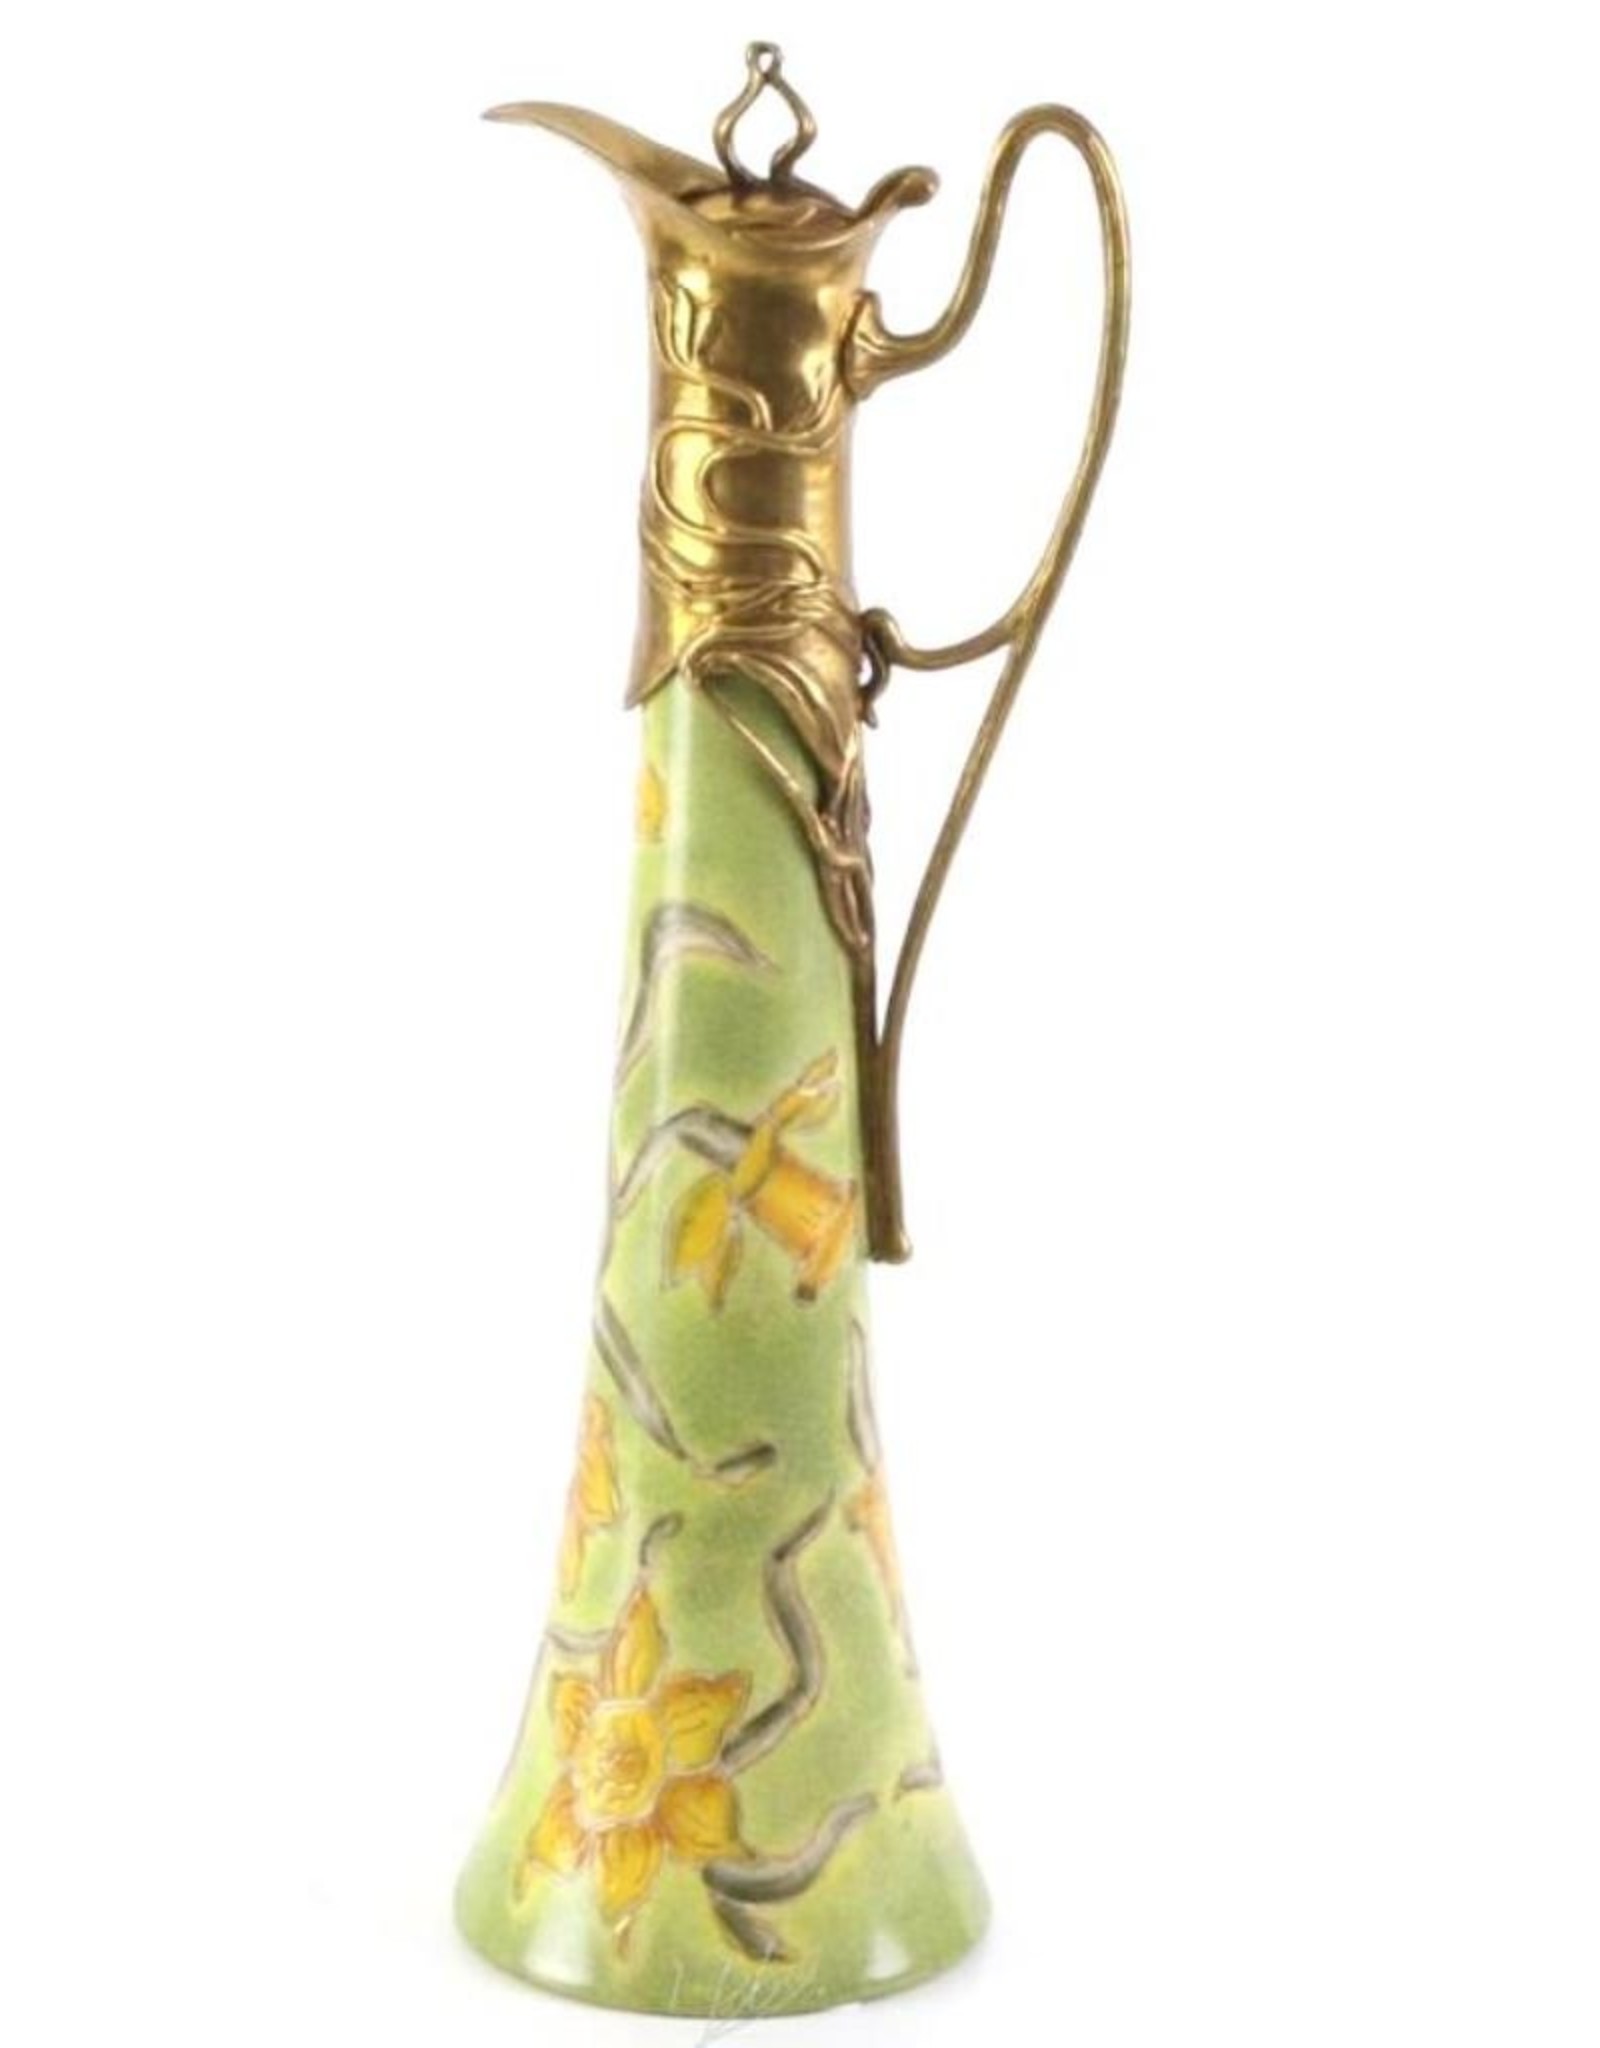 Trukado Giftware & Lifestyle -  Unique porcelain carafe mounted with bronze and hand-painted